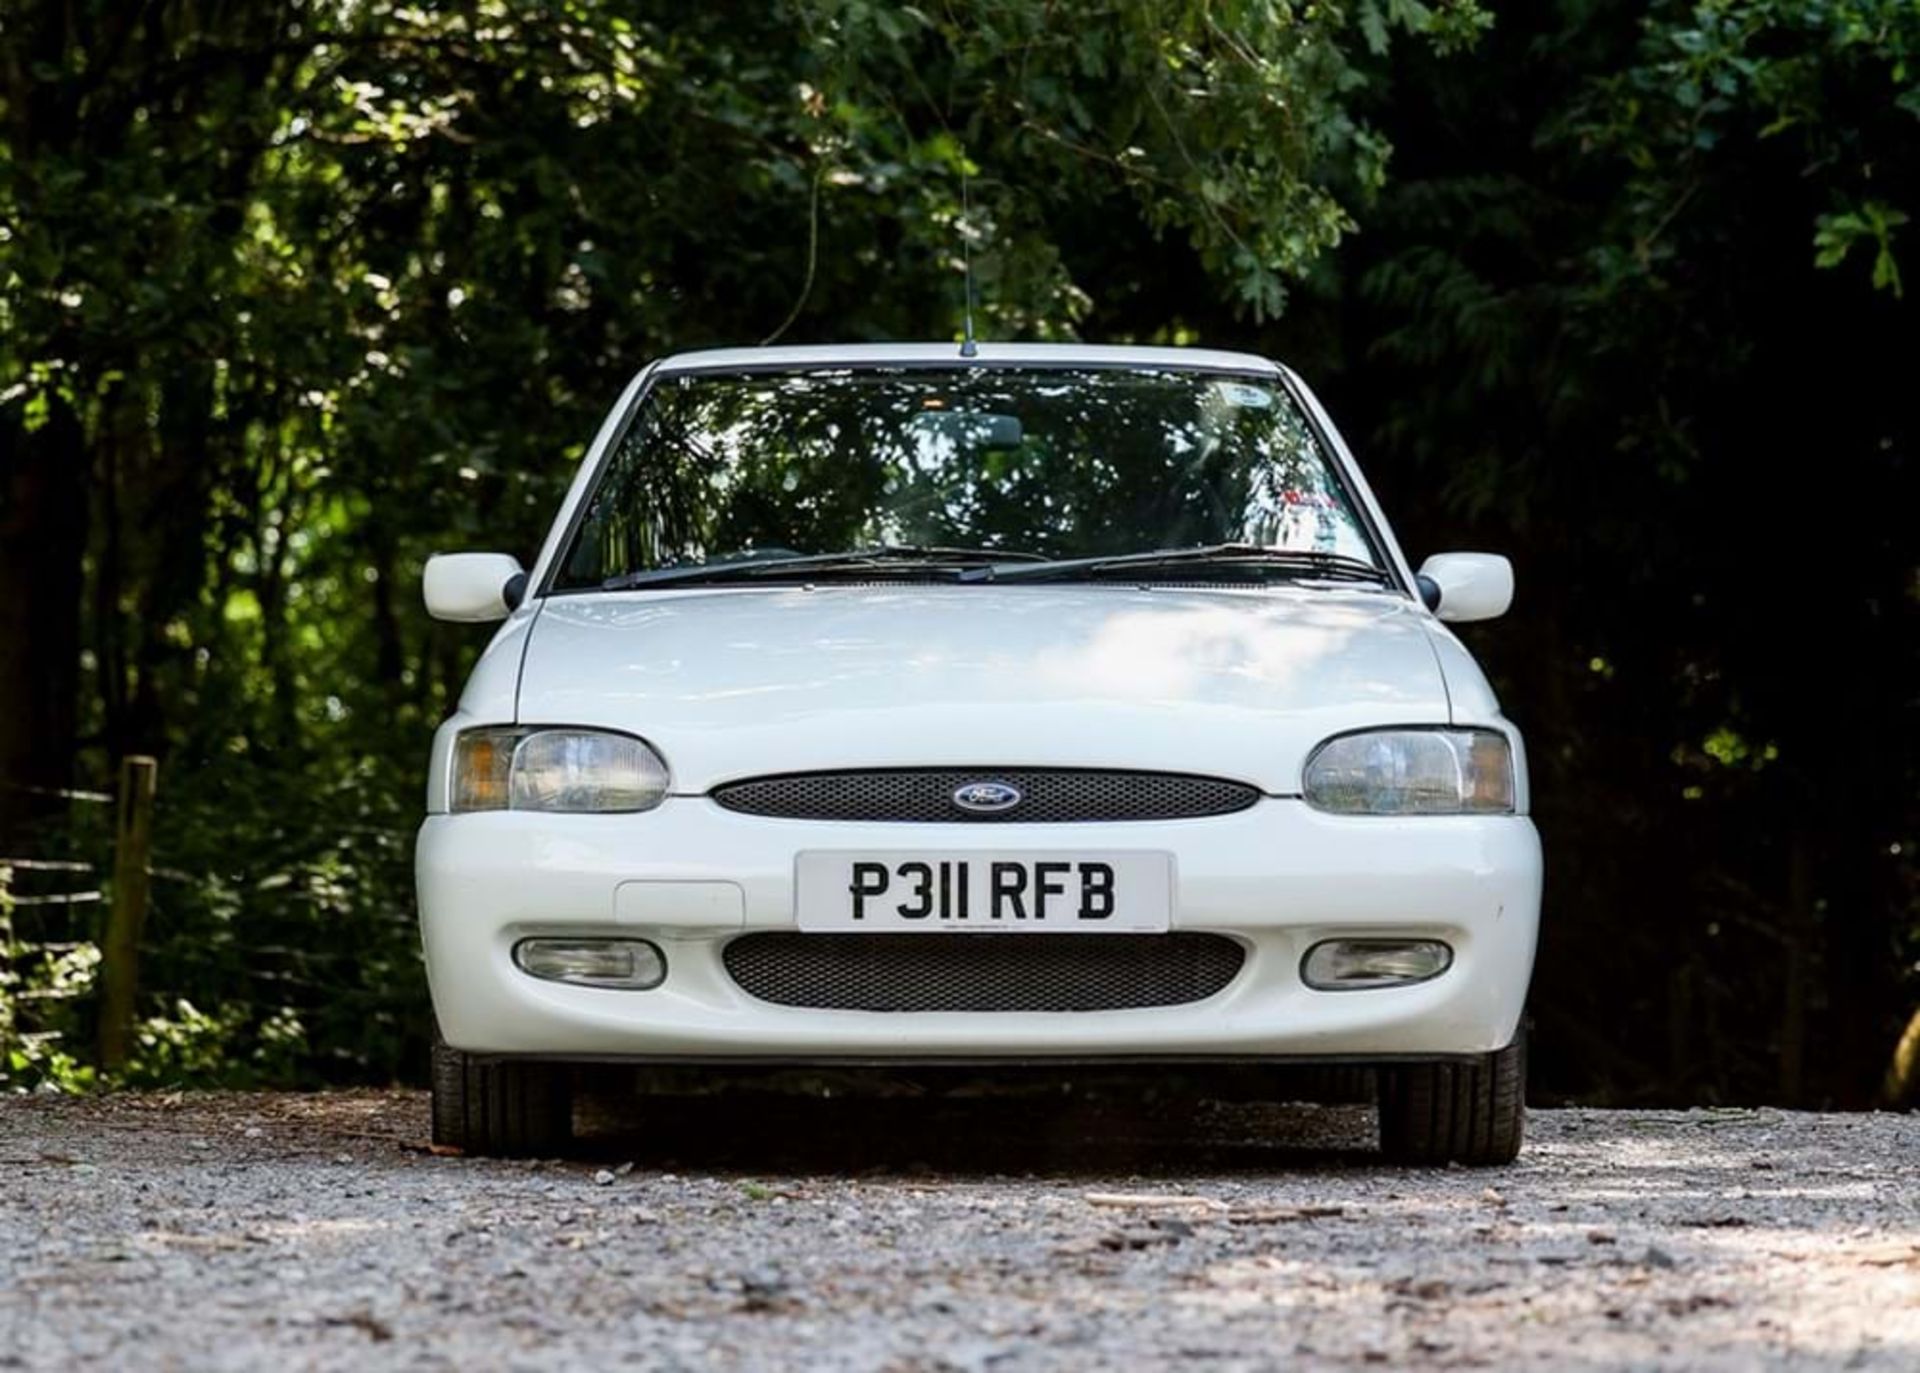 1996 Ford Escort RS2000 - Image 5 of 10